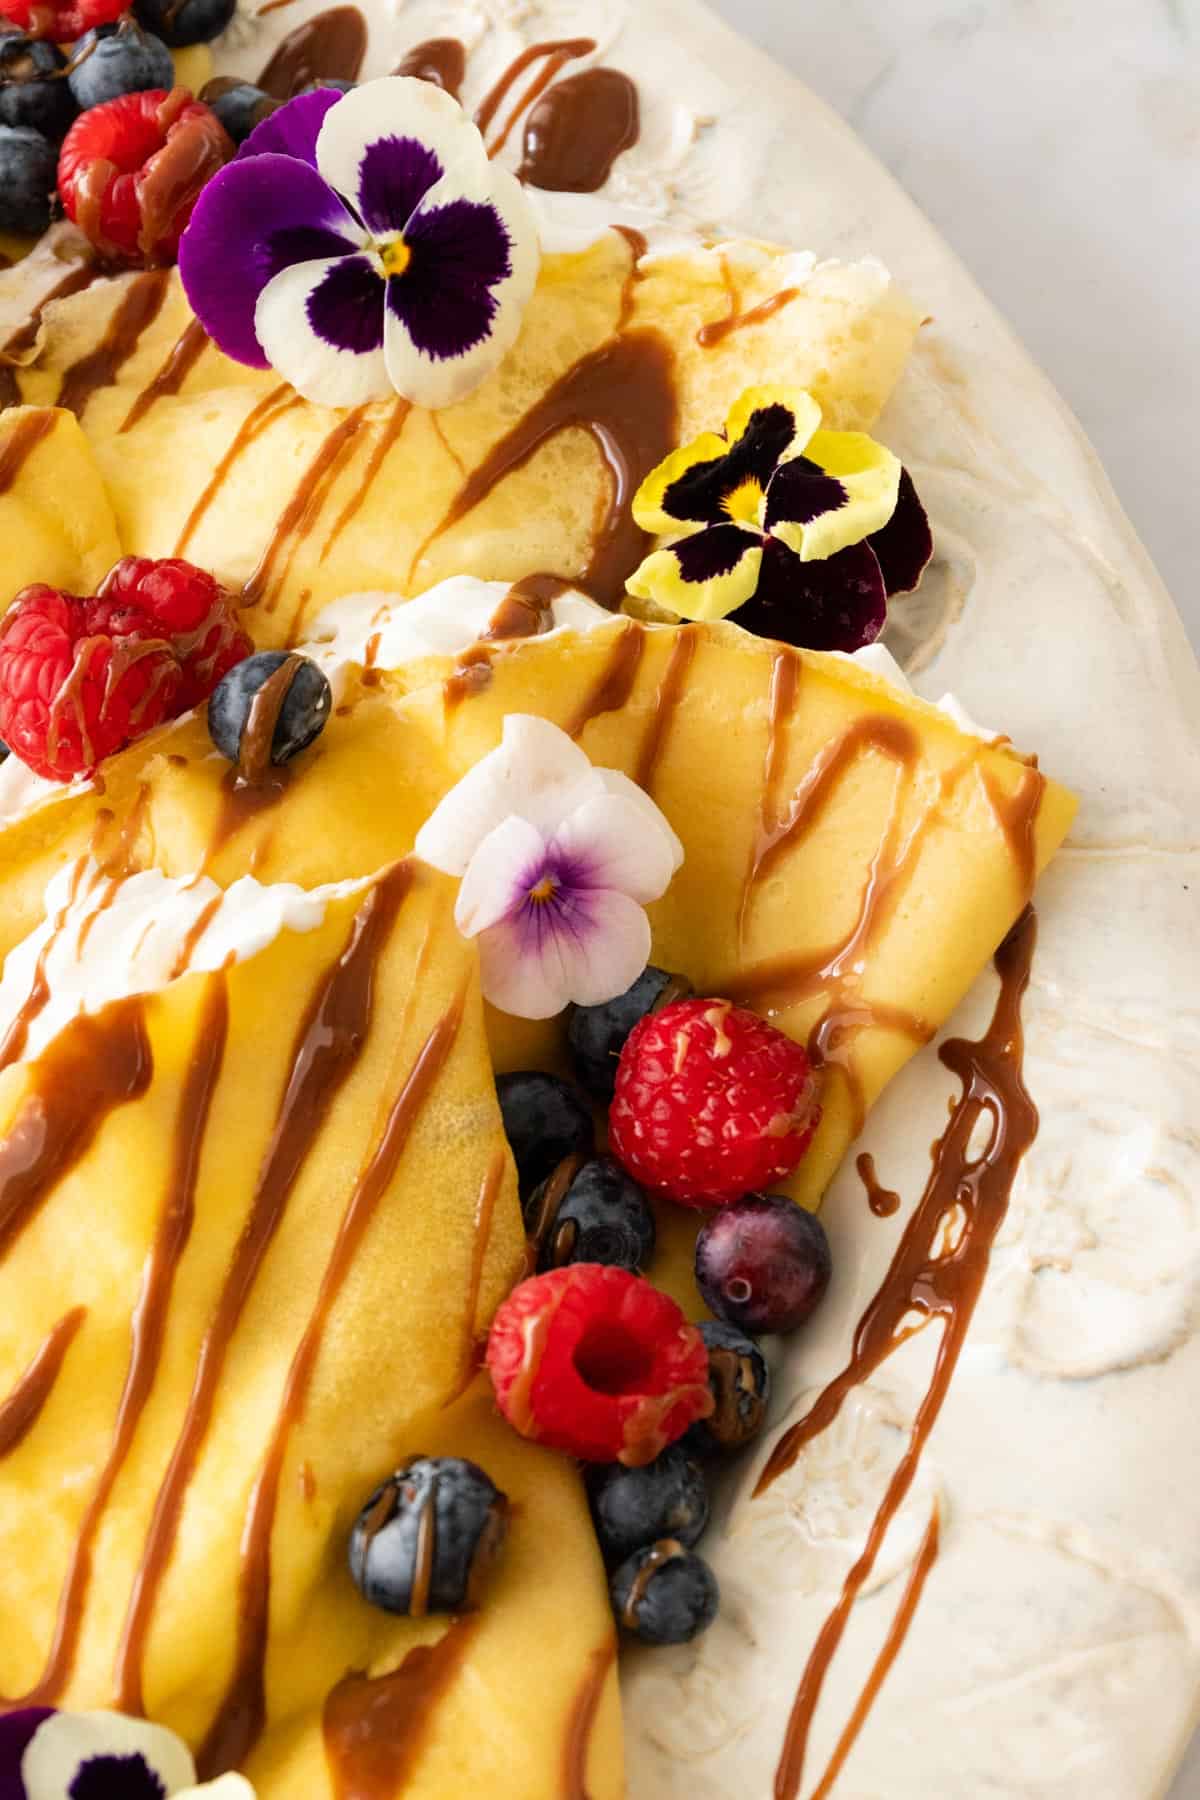 a plate with crepes and whipped cream inside the crepes. The crepes are garnished with berries, chocolate sauce, and flowers